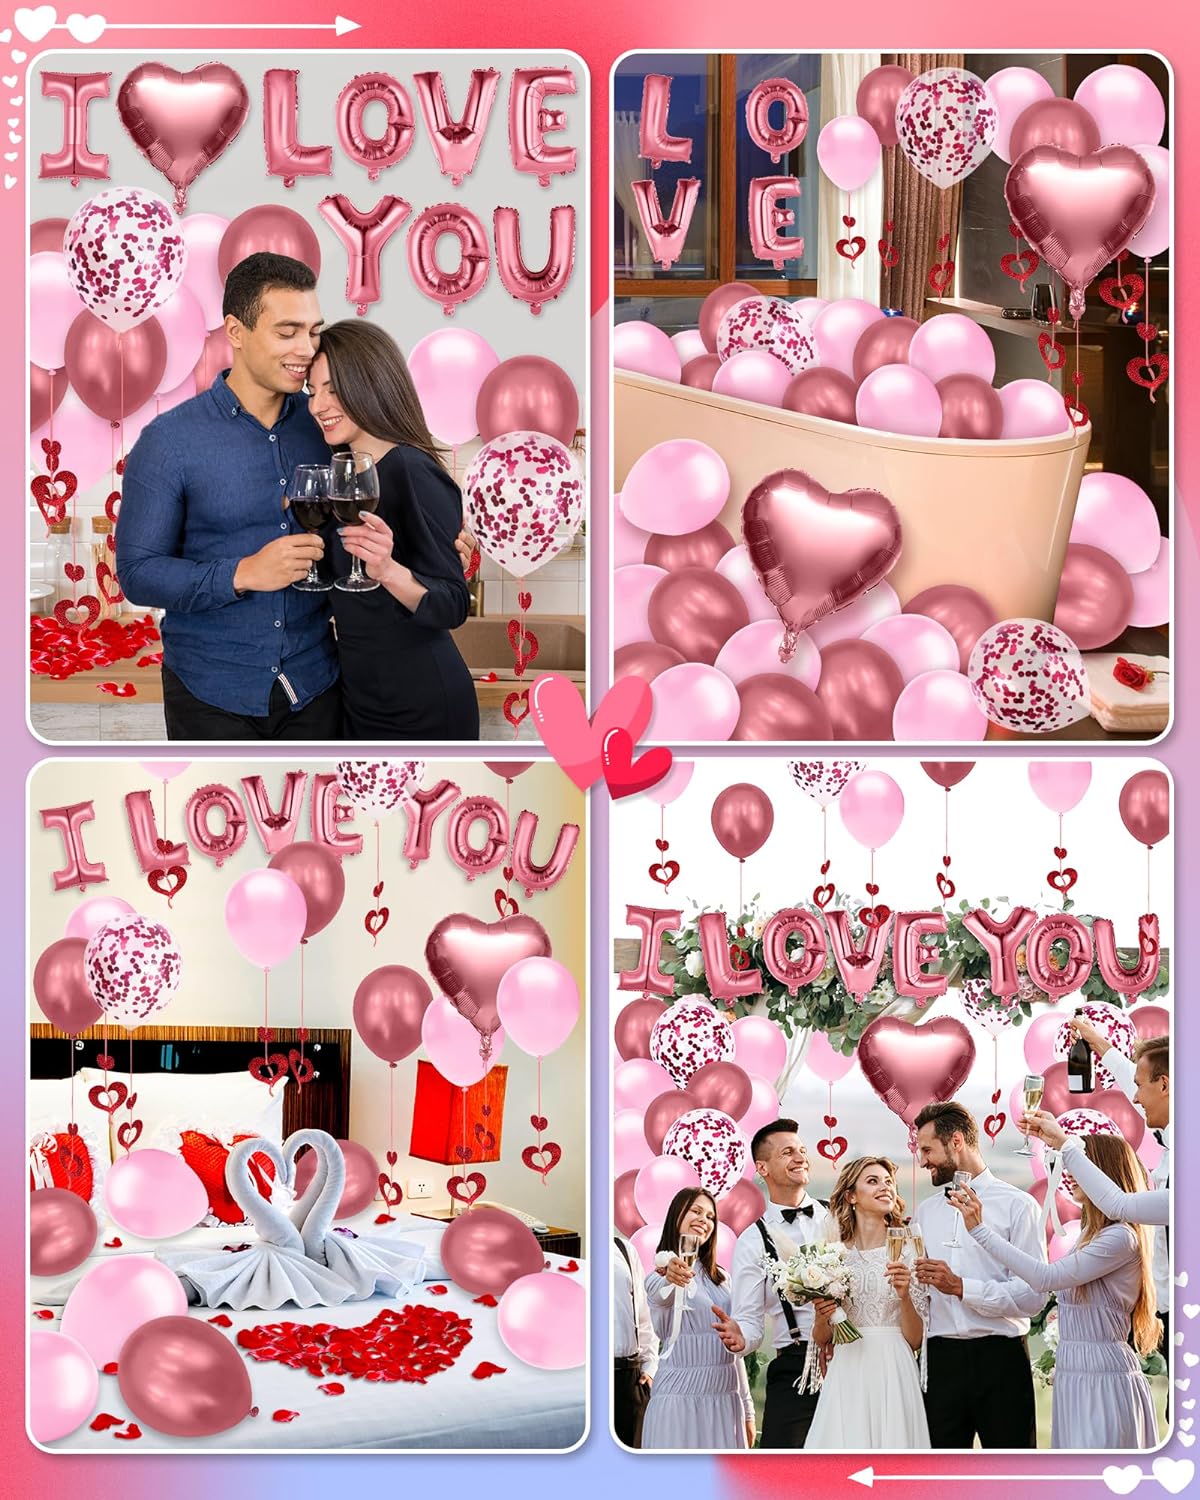 I Love You Balloons Valentines Day Balloons Kit with Rose Gold Pink Heart Balloons Rose Petals